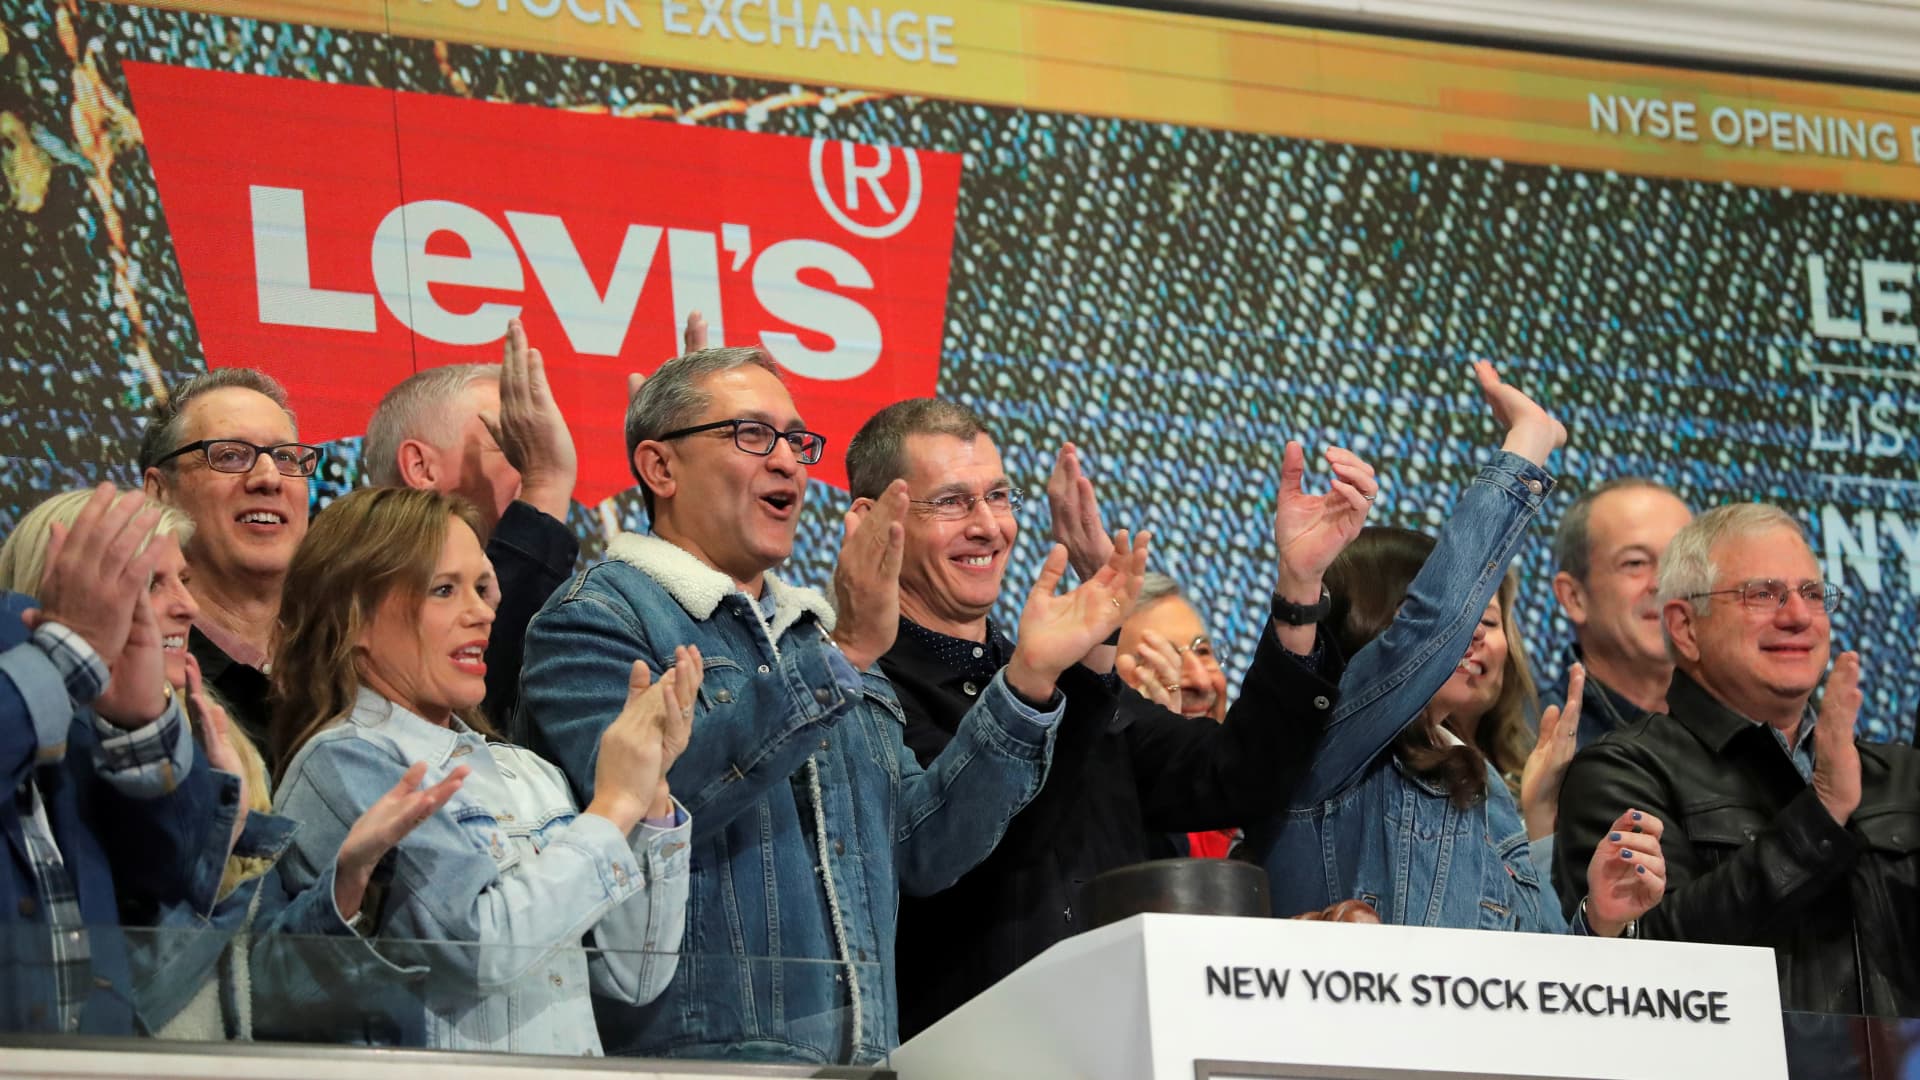 Levi Strauss & Co. CEO Chip Bergh rings the opening bell on New York Stock Exchange (NYSE) during the company's IPO in New York, U.S., March 21, 2019.